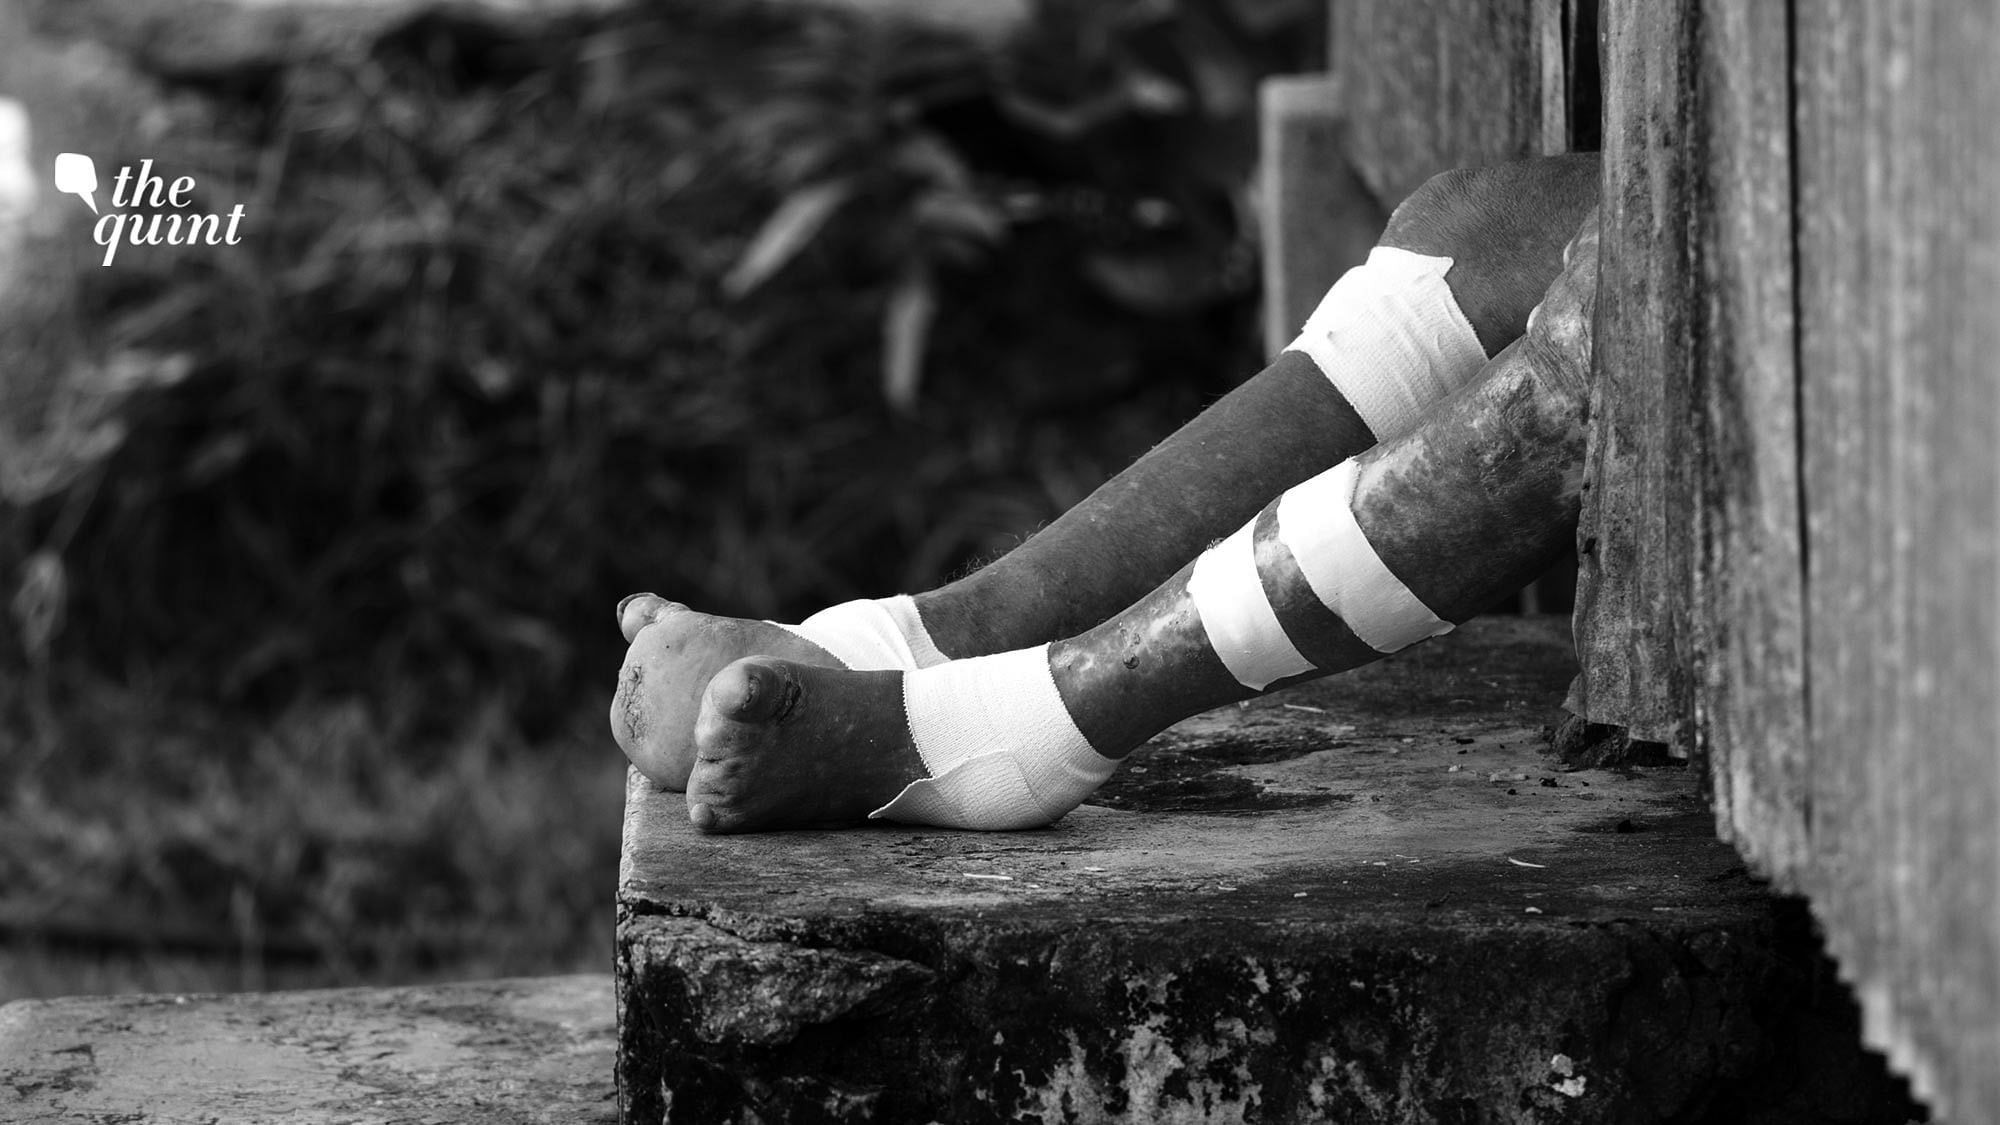 Image of a leprosy-affected person’s legs used for representational purposes.